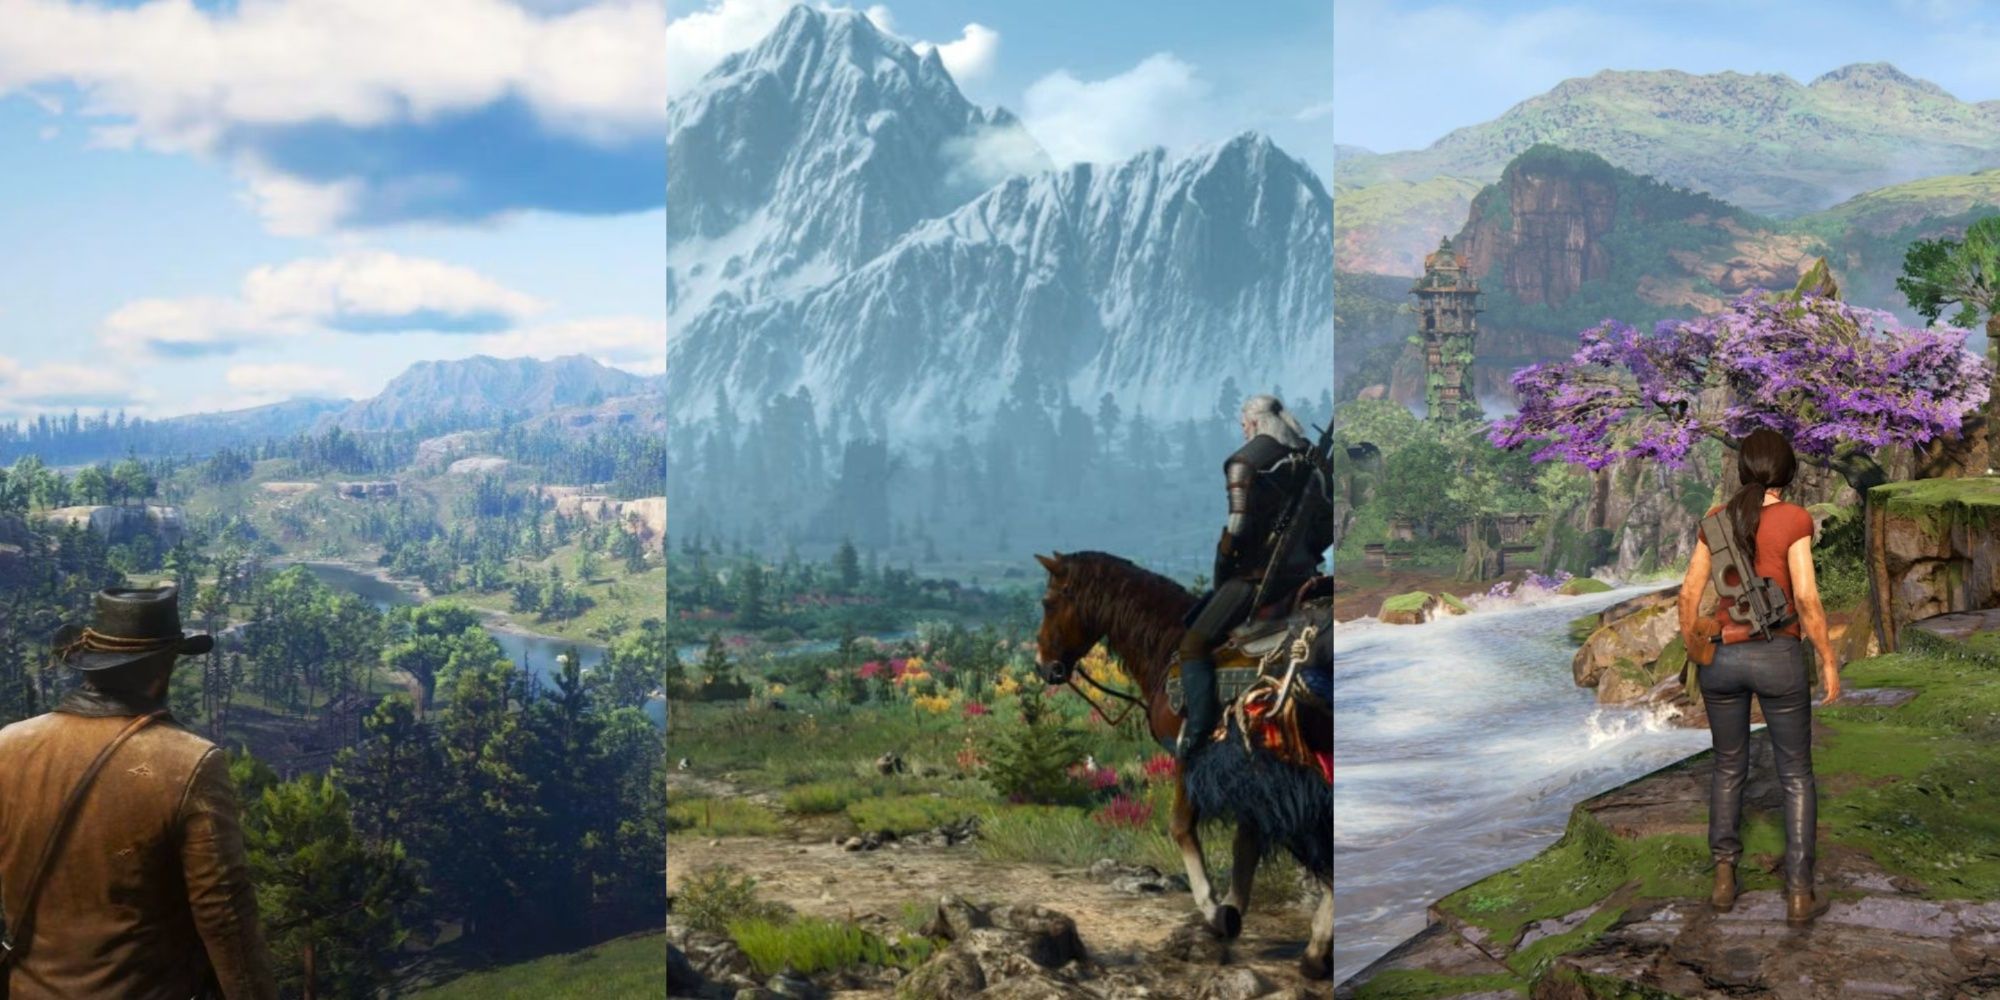 Three-image collage of Arthur Morgan overlooking the mountains and a joining stream in Red Dead Redemption 2, Geralt riding on Roach and exploring the scenic land in The Witcher 3, and Chloe Frazer near purple blossoms and a waterfall in Uncharted: The Lost Legacy.